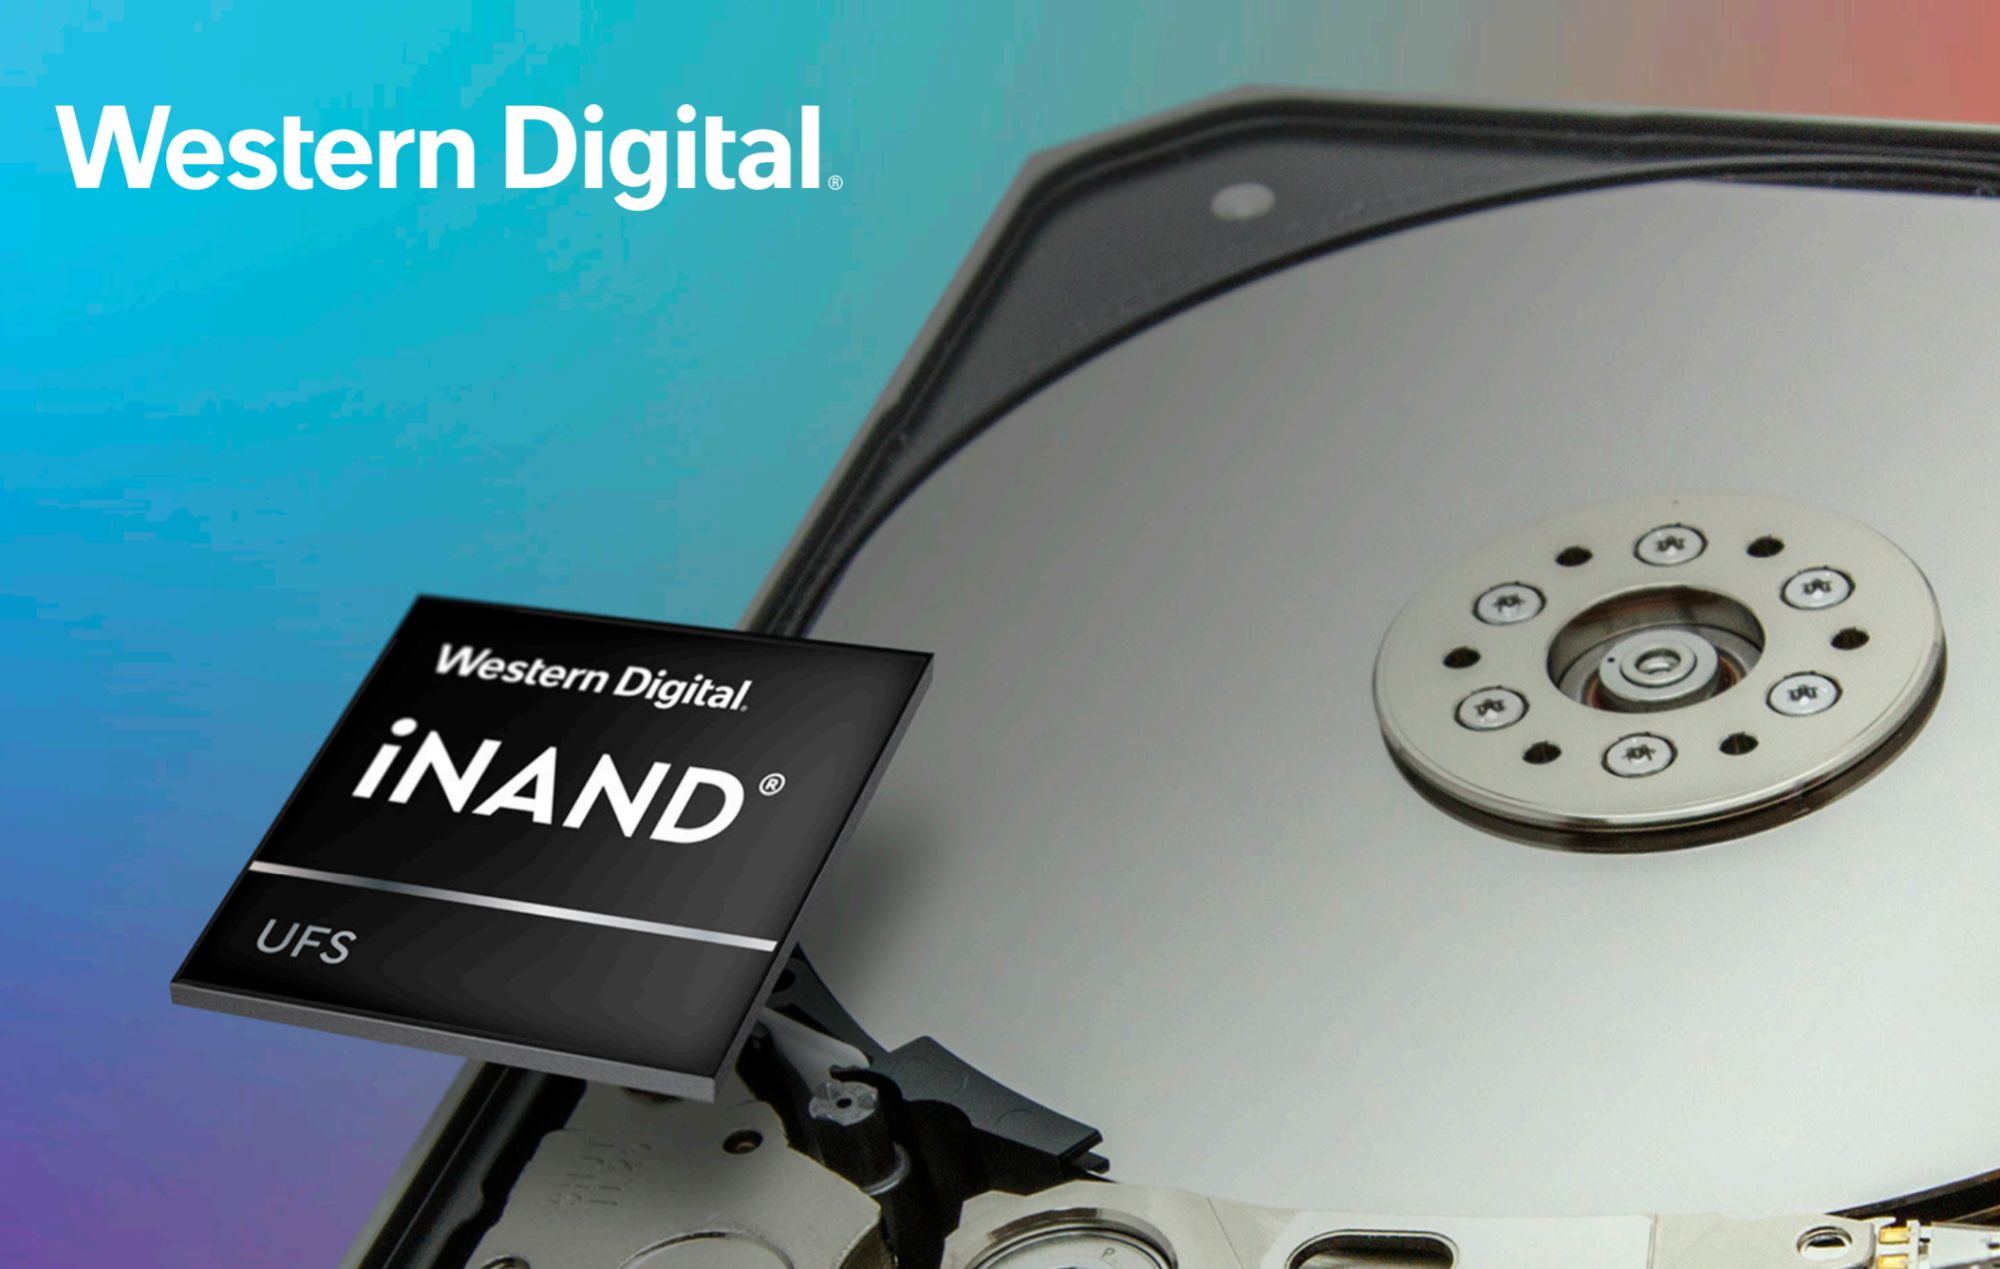 WD Announces 20TB Hybrid Hard Drive With OptiNAND Technology